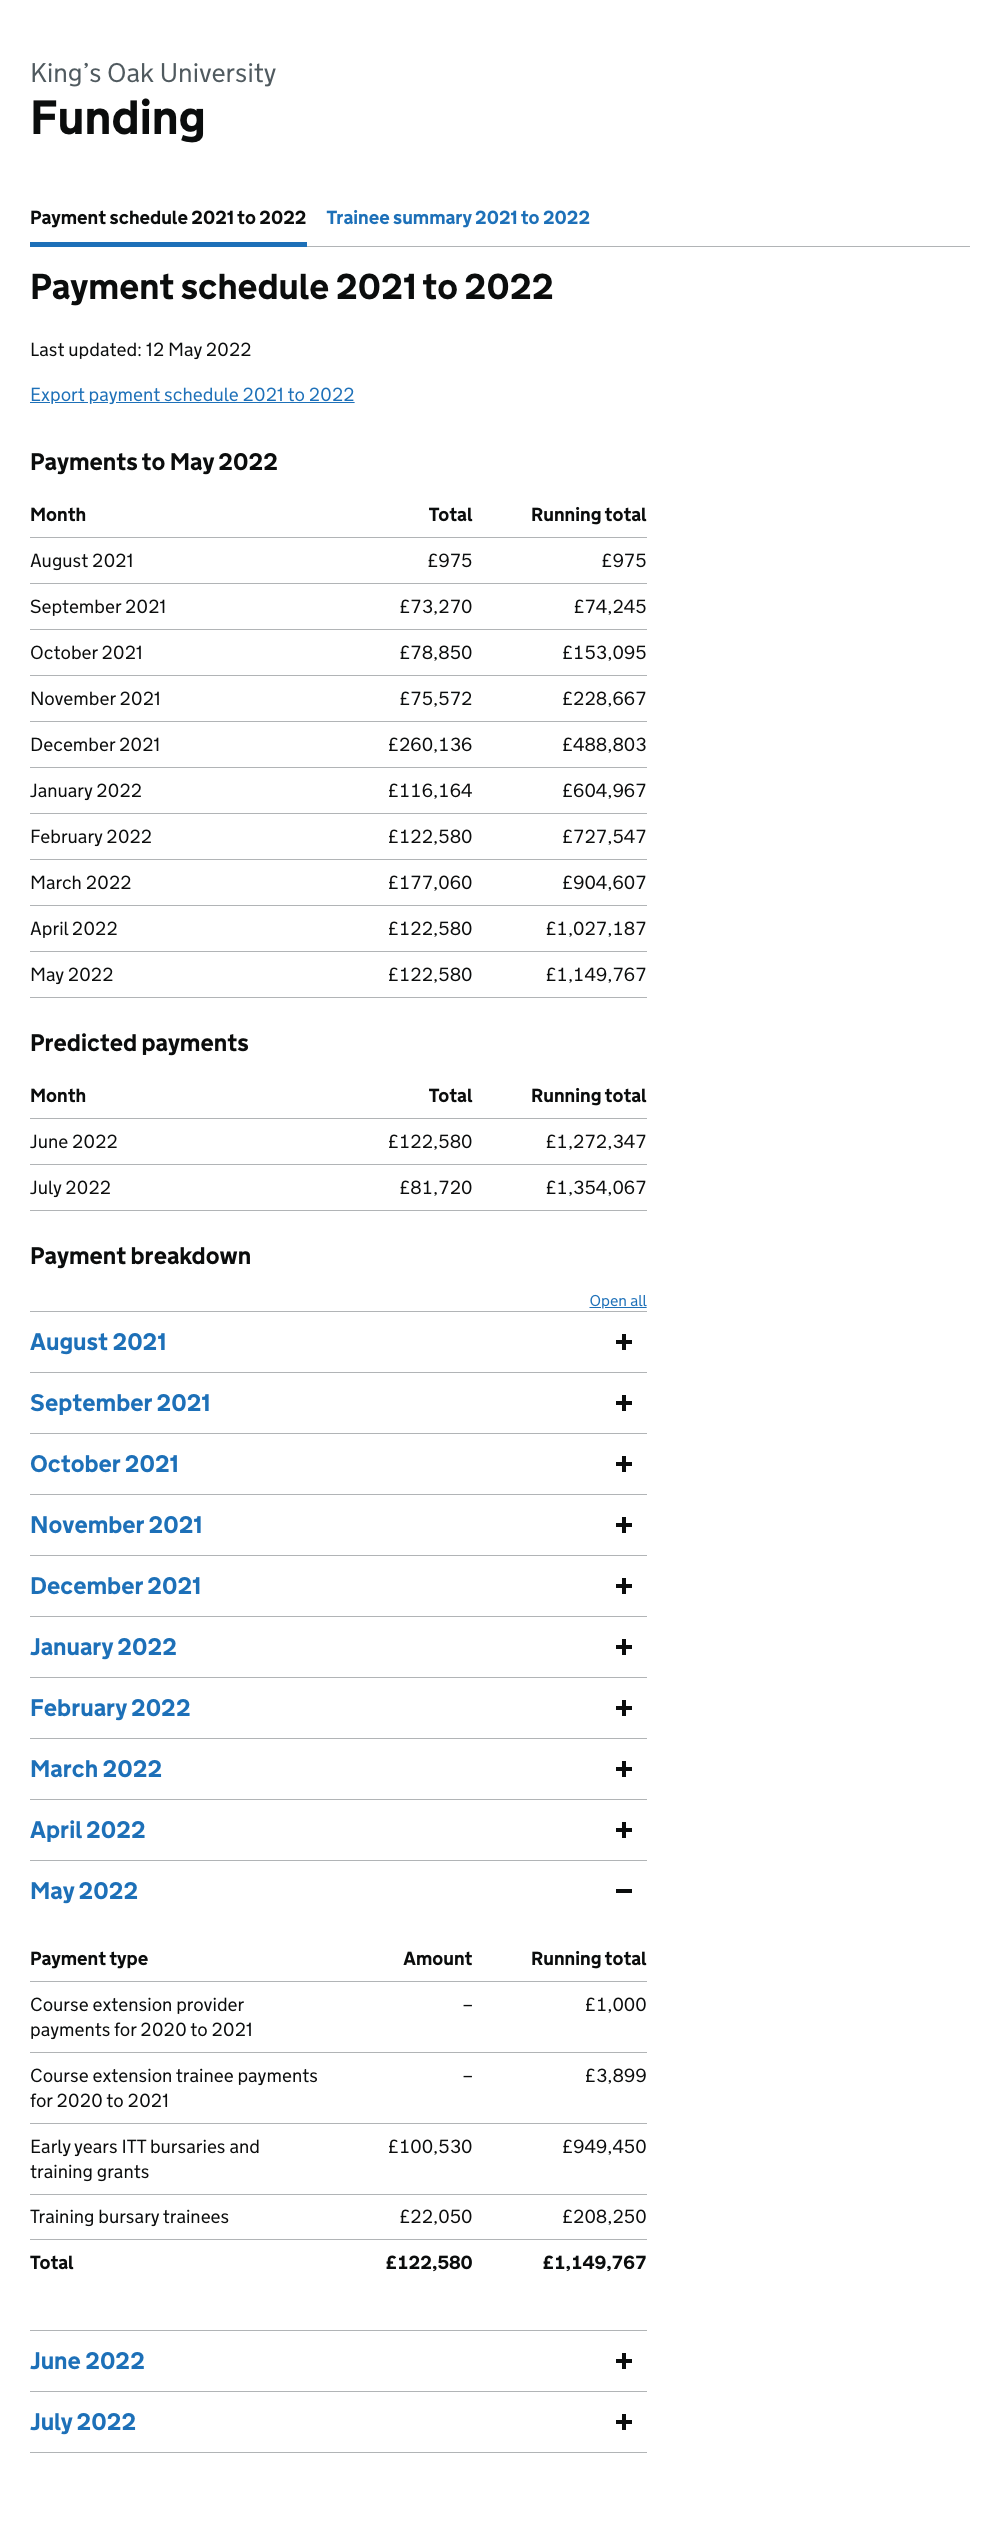 Monthly payments split by payment month, with summary.